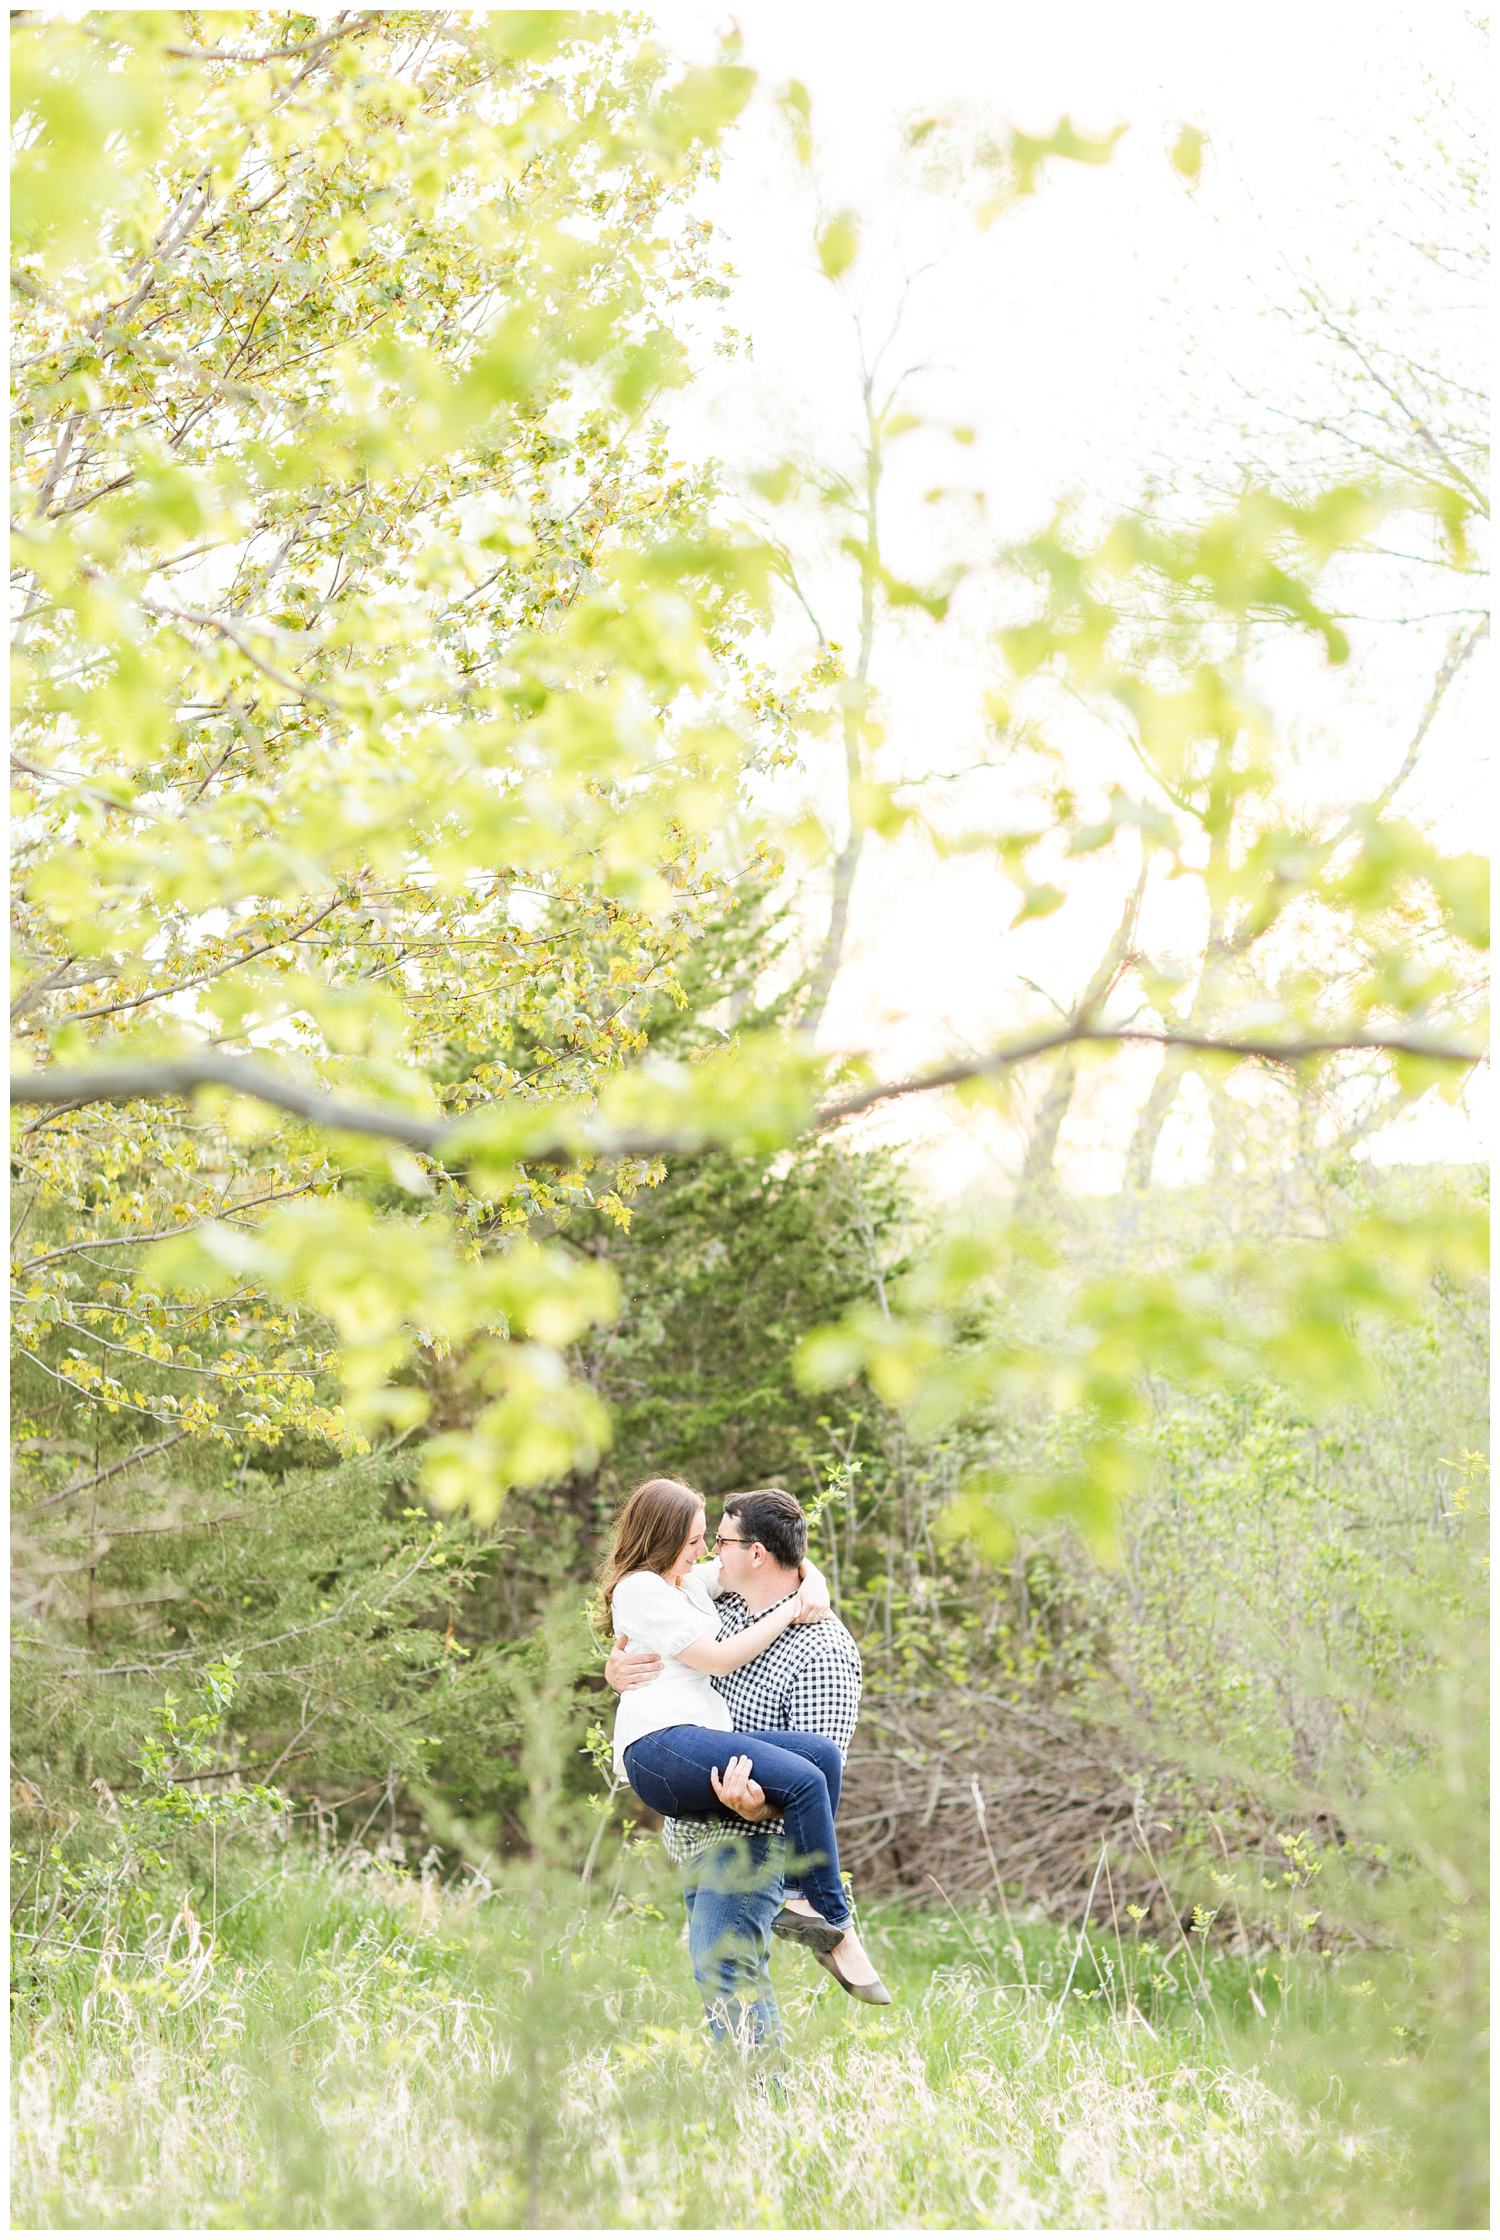 Joe carries Leslie through a wooded forest | CB Studio